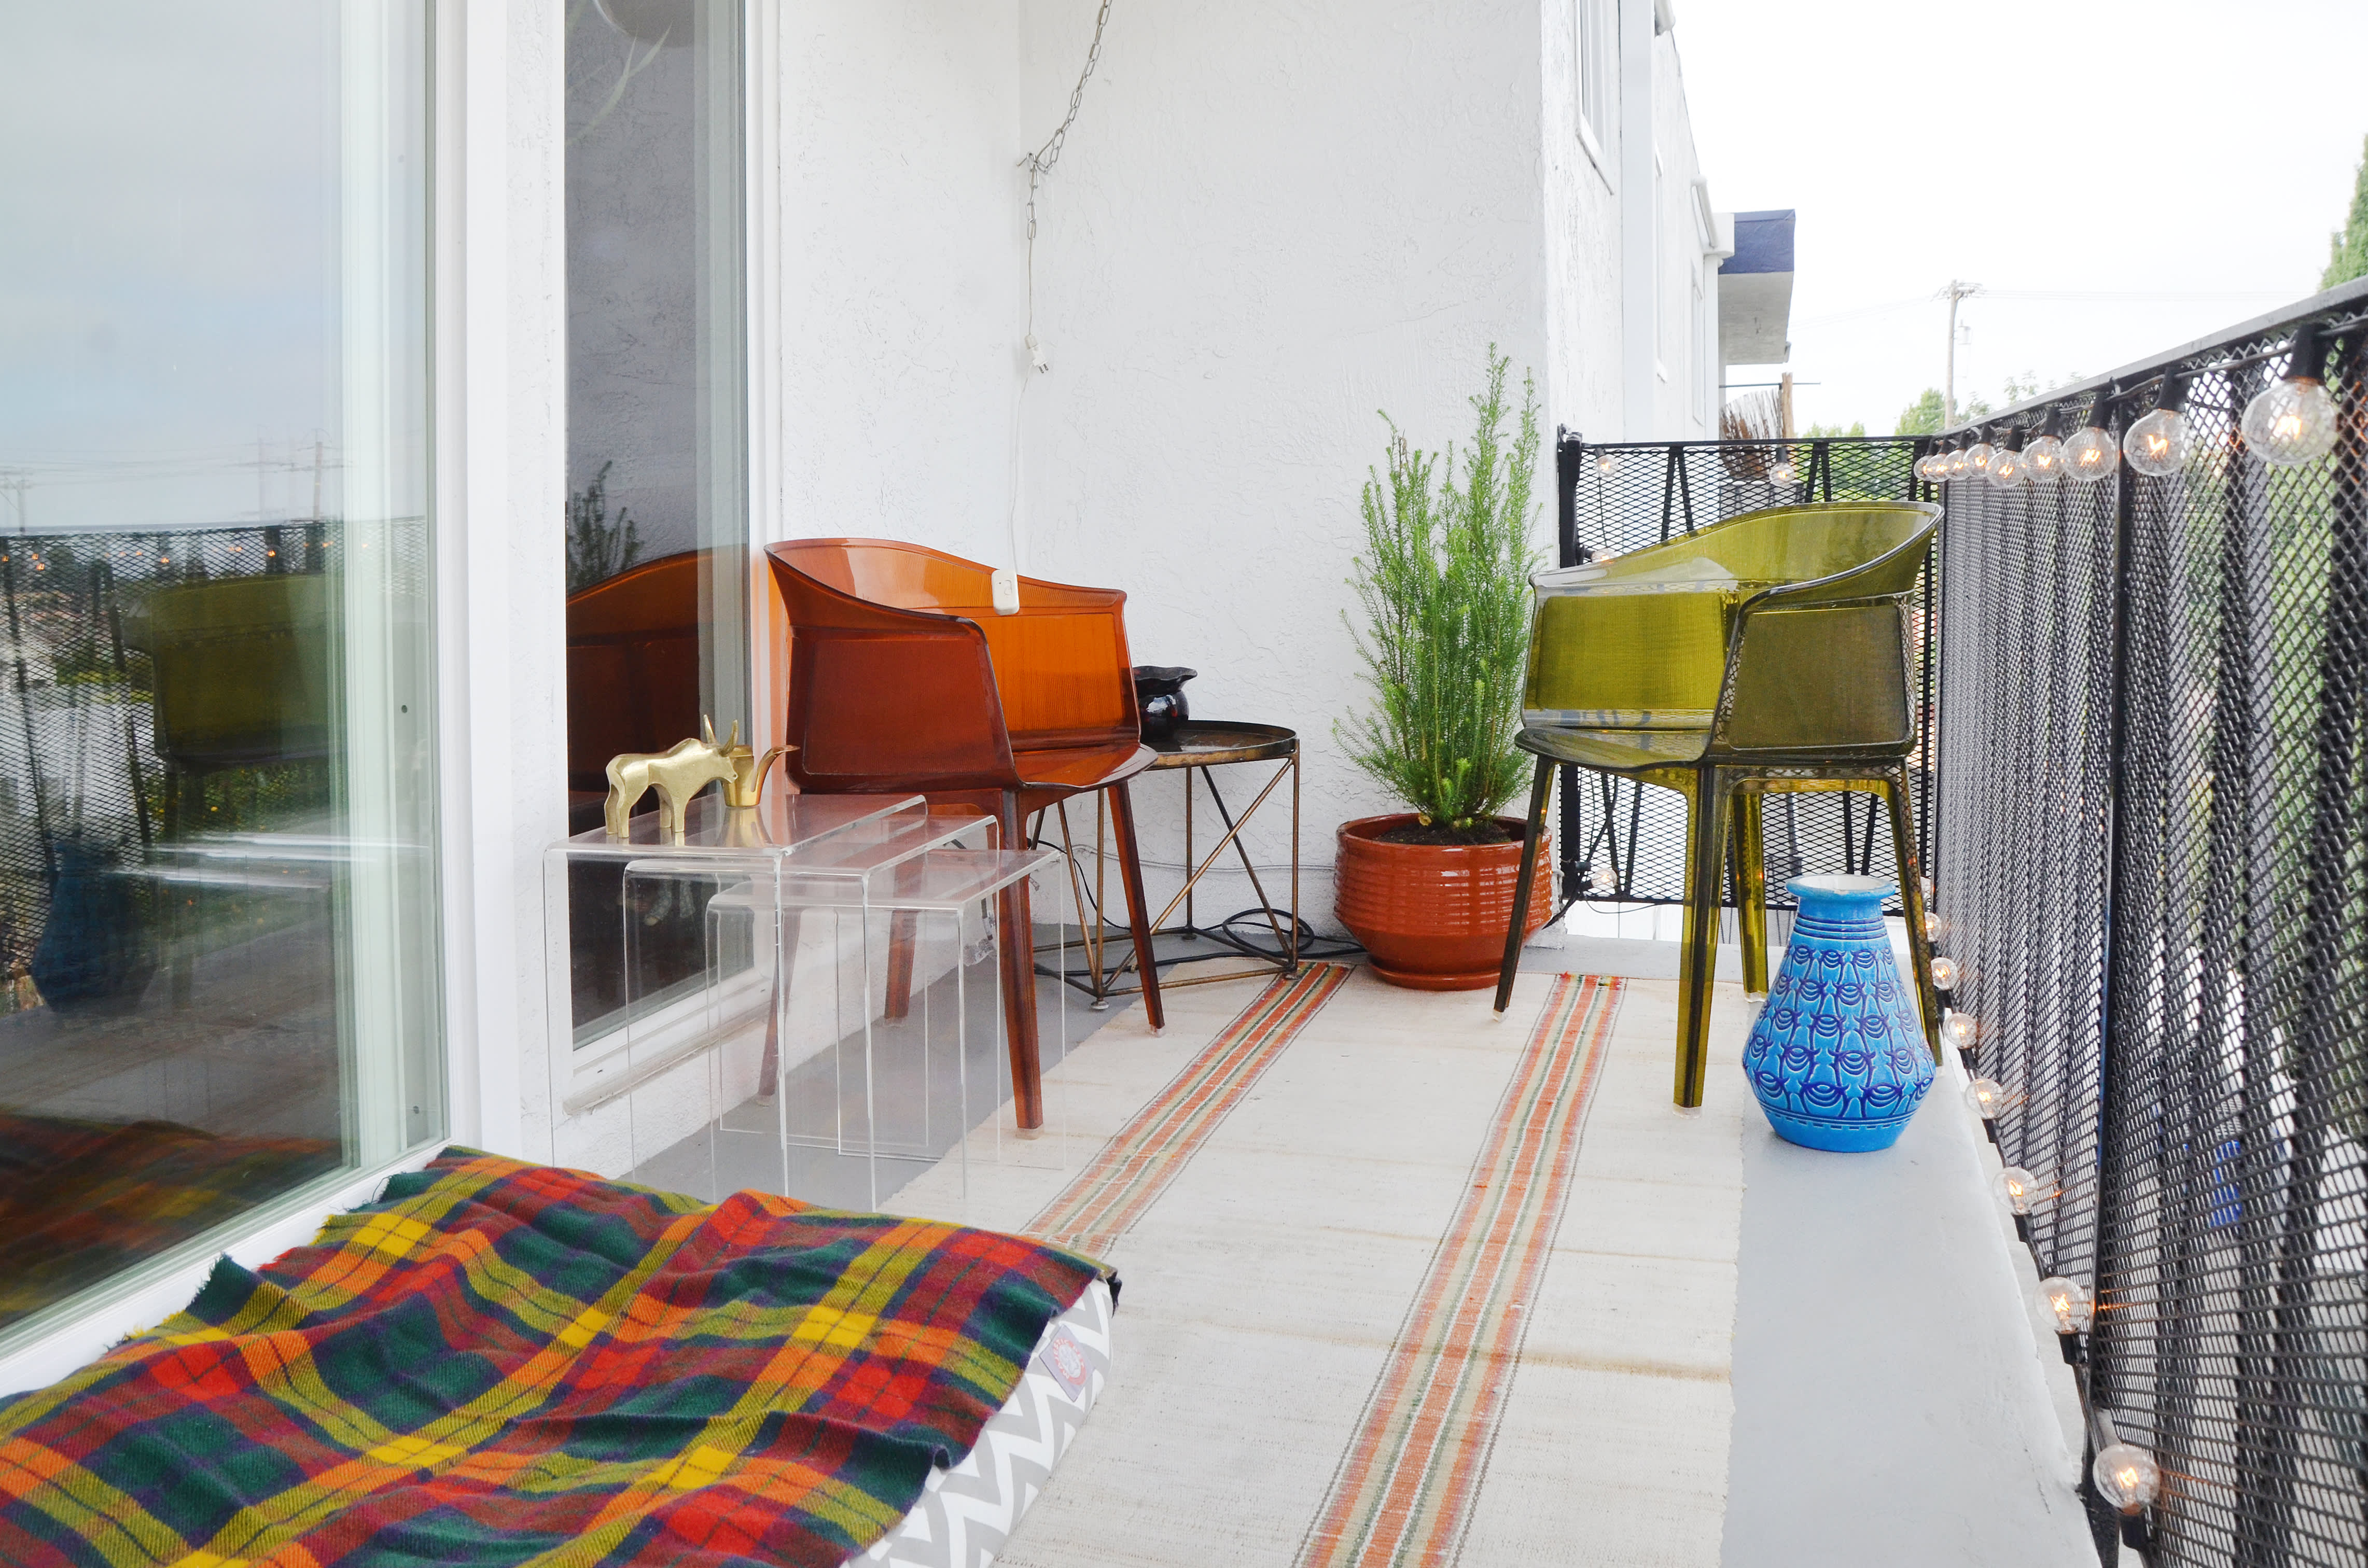 Create the Perfect Outdoor Living Room With These 6 Design Tips